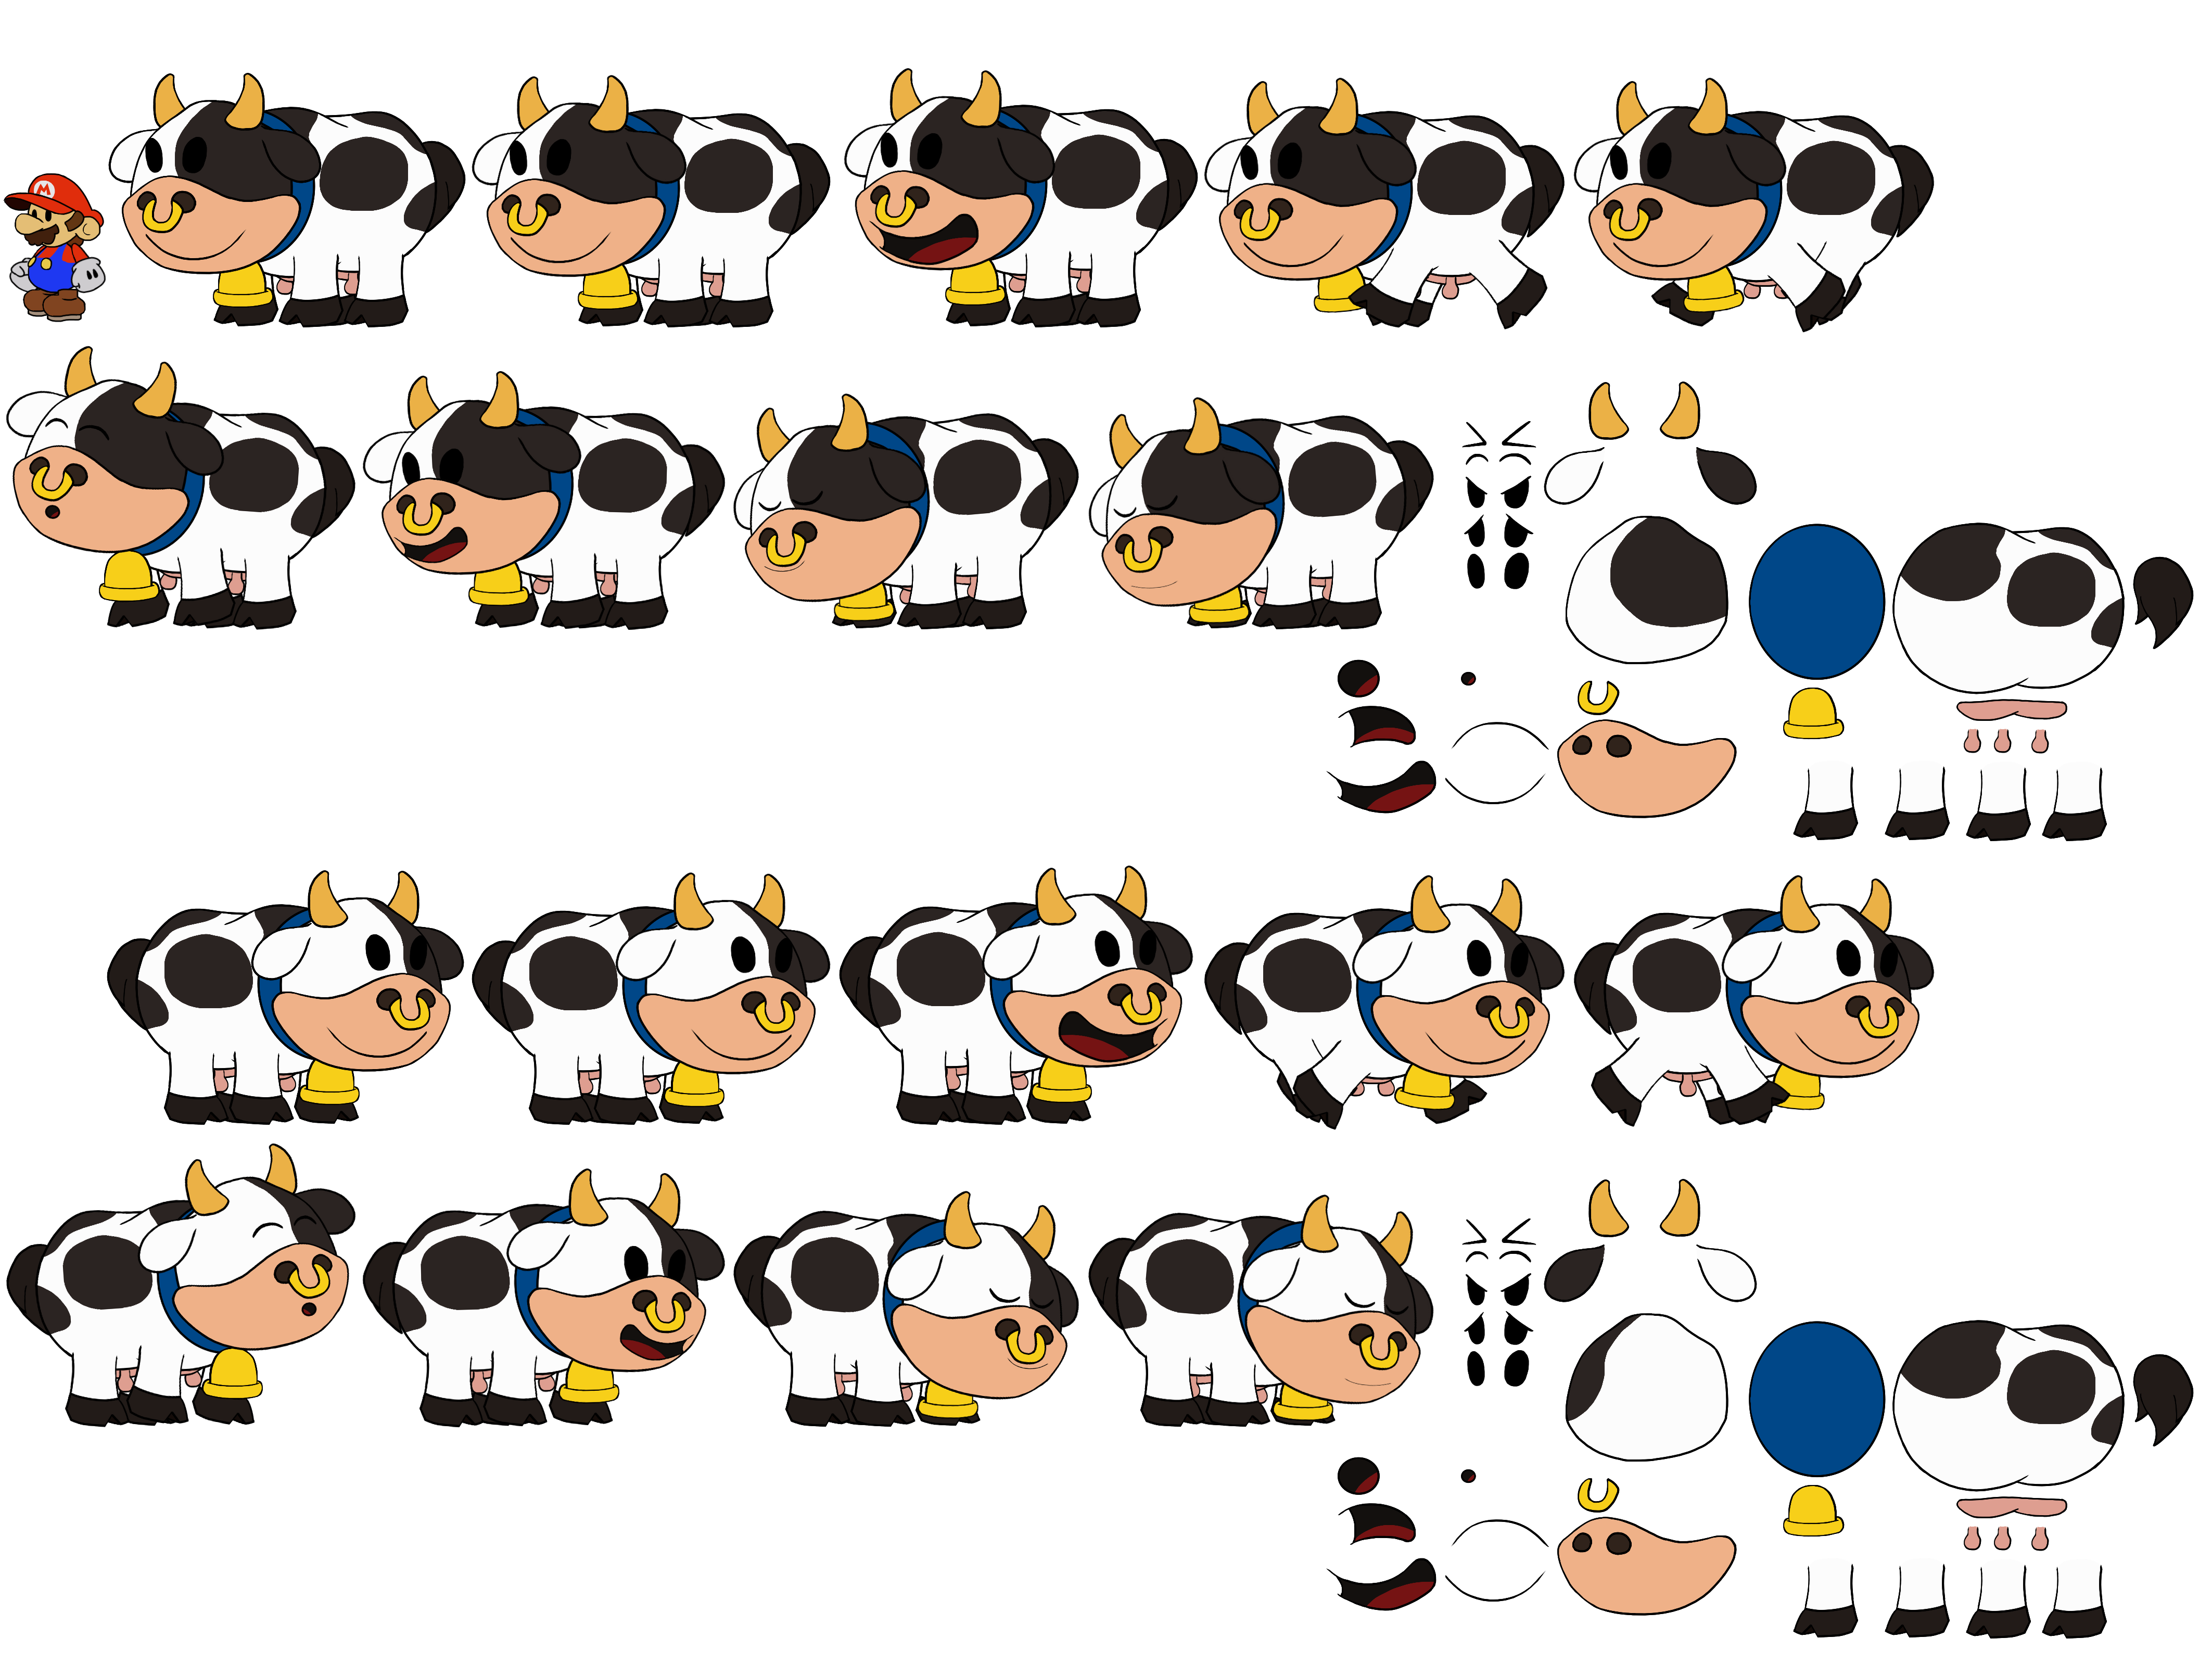 Moo Moo (Spotted) (Paper Mario-Style)